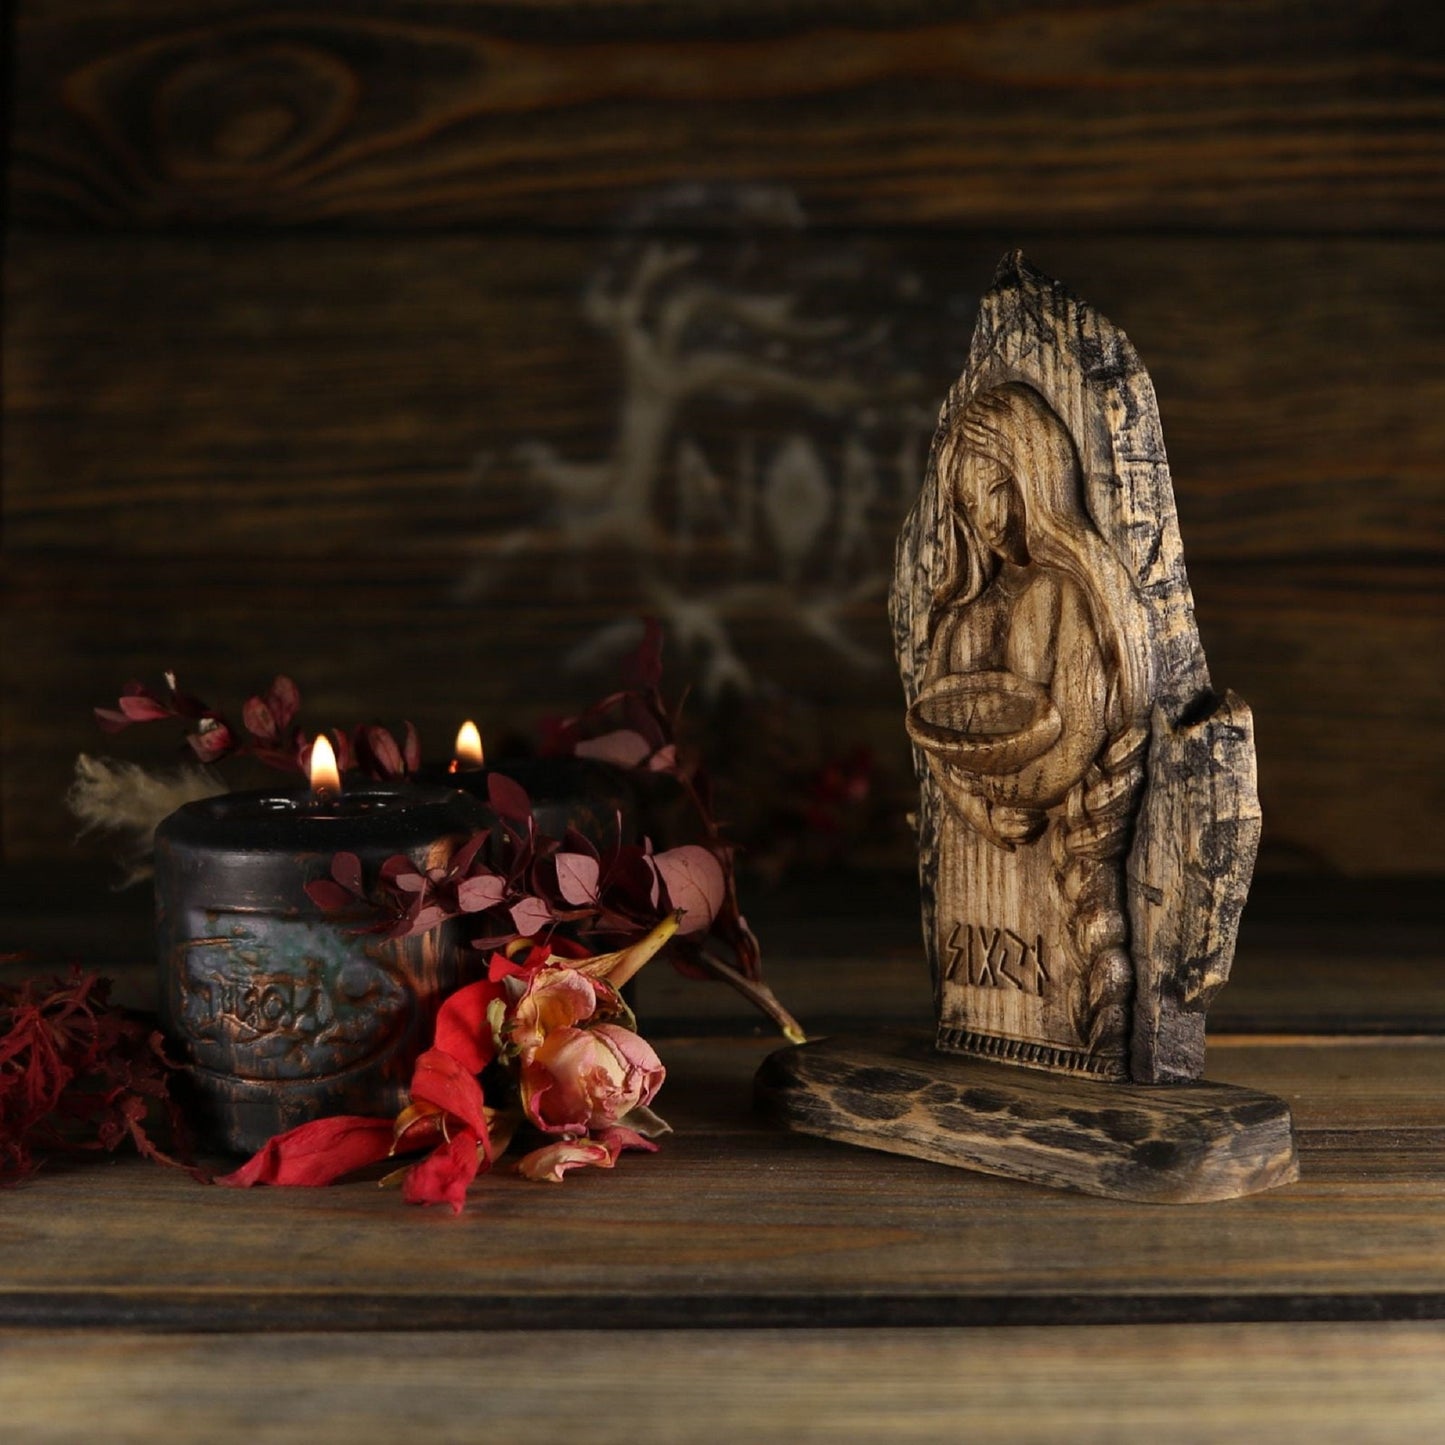 Sigyn, Wooden mini figurine, Wood carving Wood sculpture